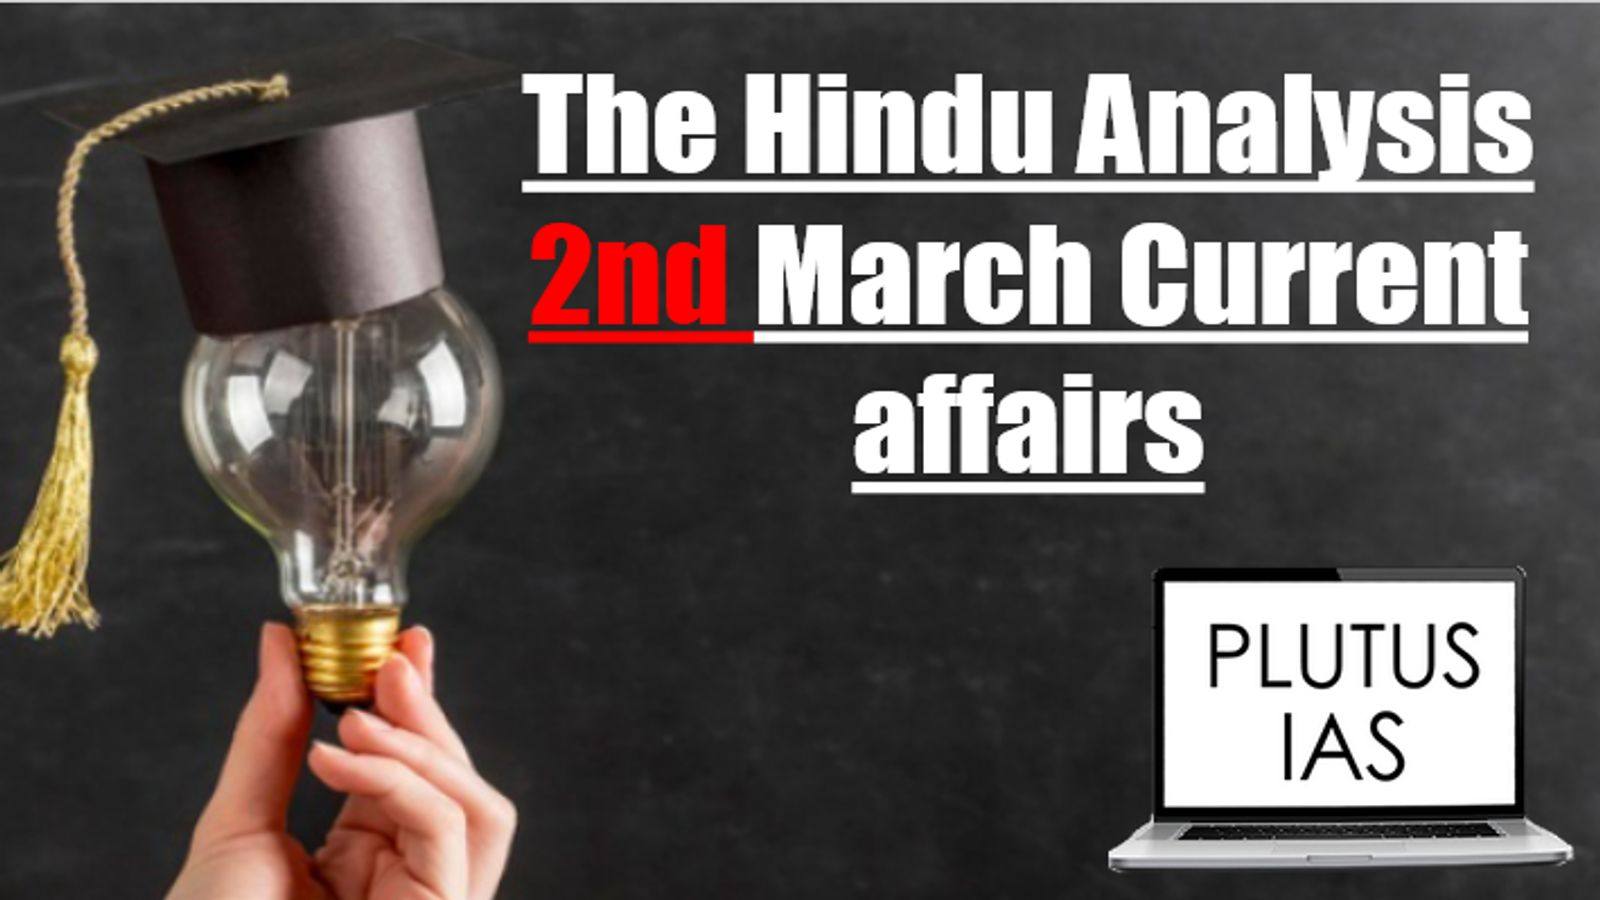 The Hindu Analysis 2nd March